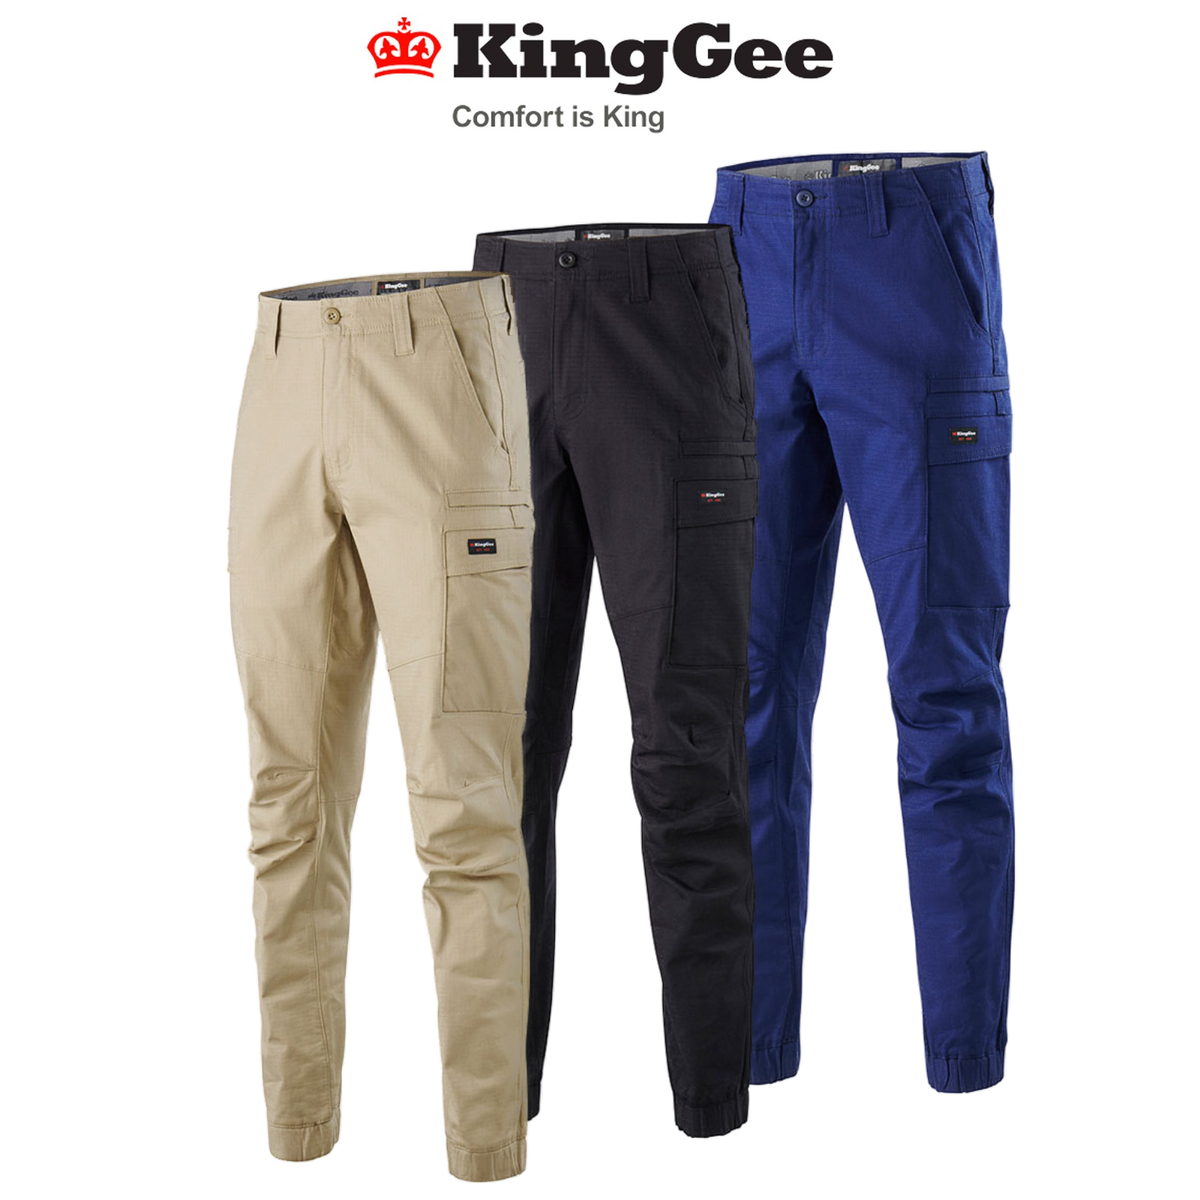 KingGee Mens Workcool Pro Cuff Pant Comfort Pants Cargo Stretch Ripstop K13011